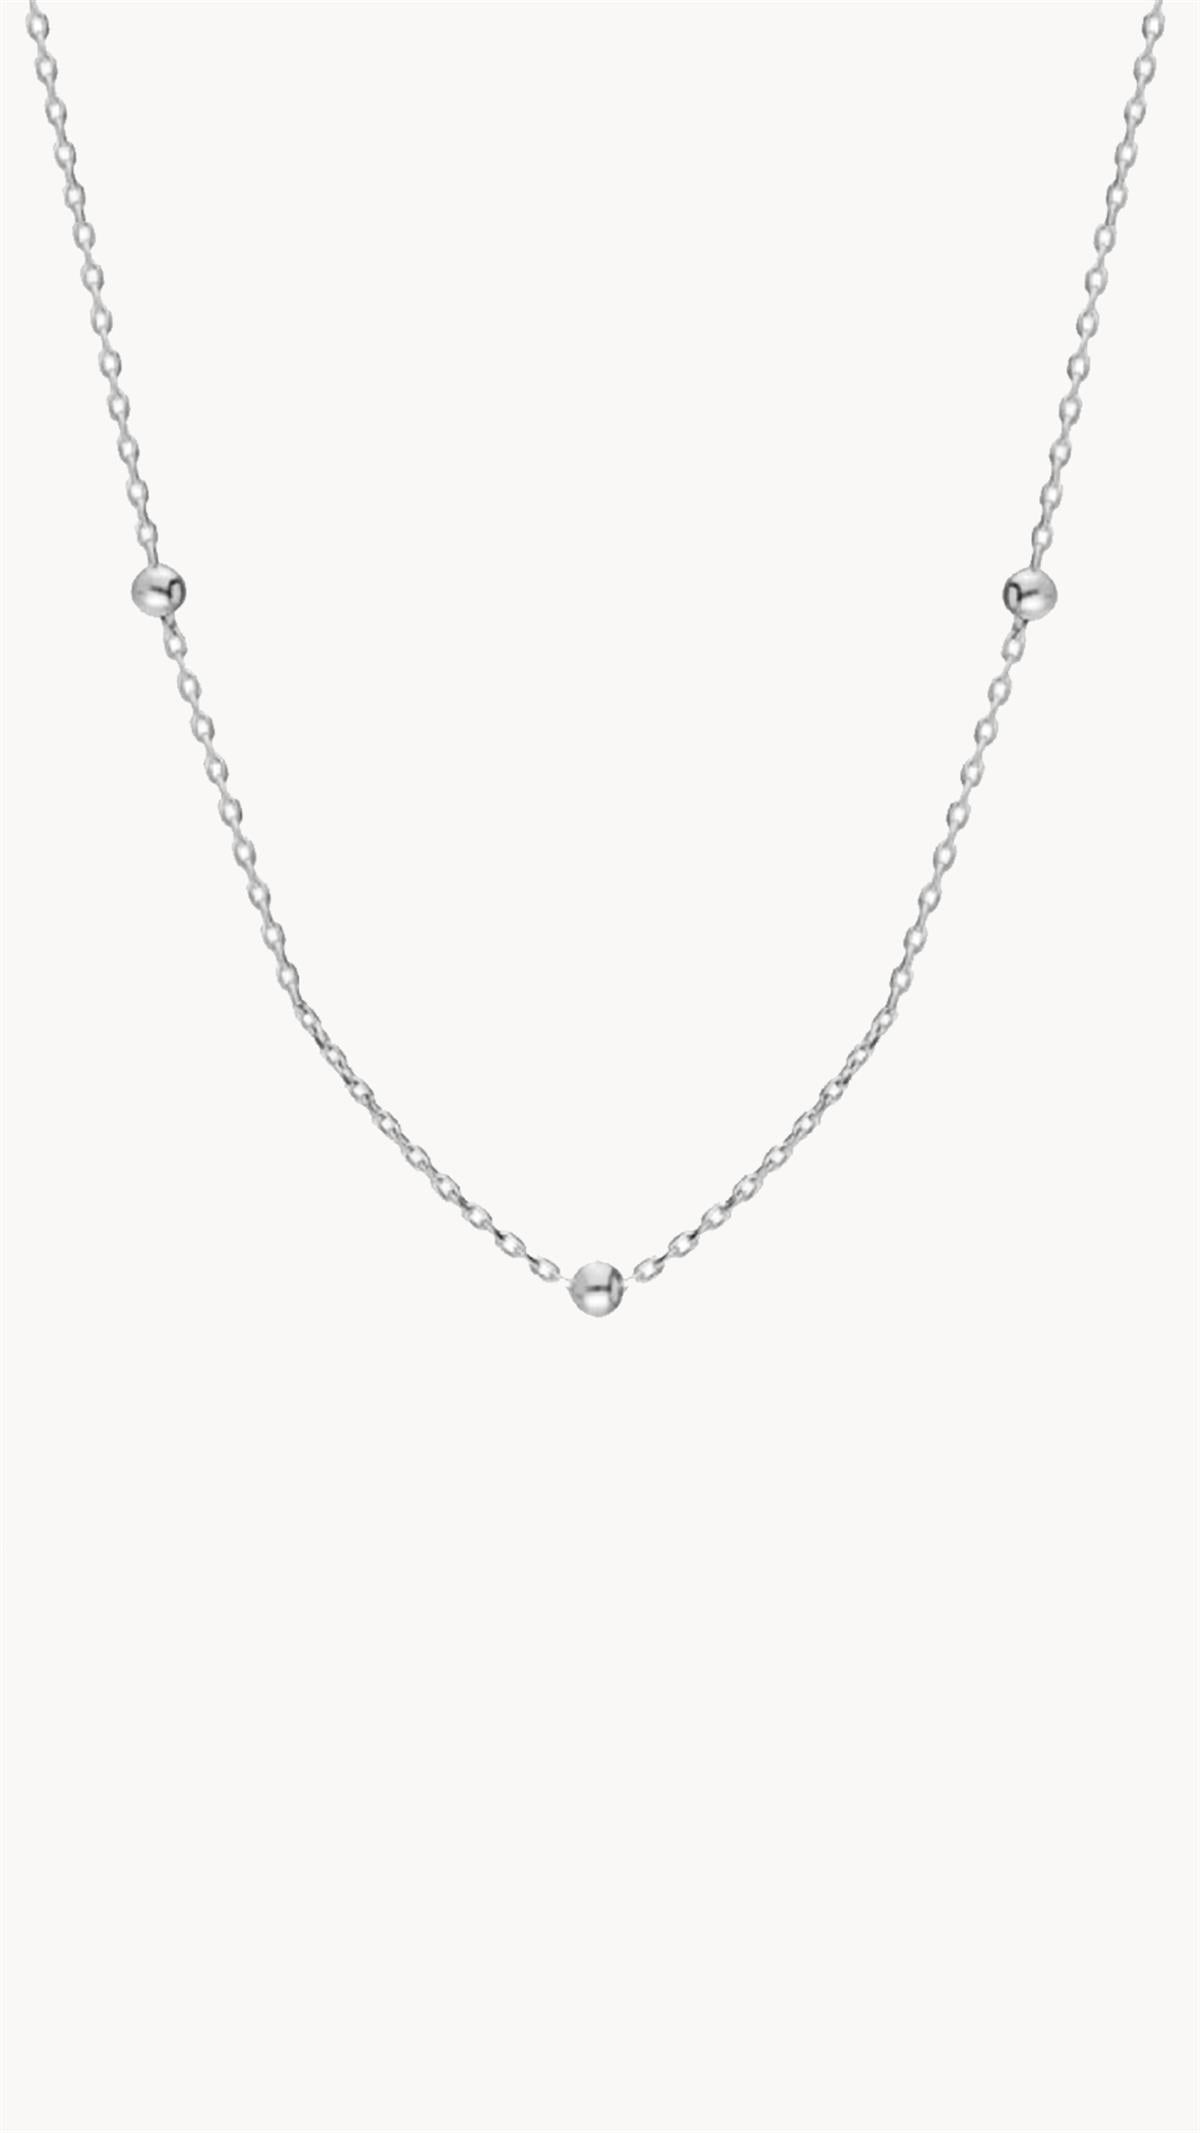 Set of 10 Ball Chain Necklace 925 Sterling Silver